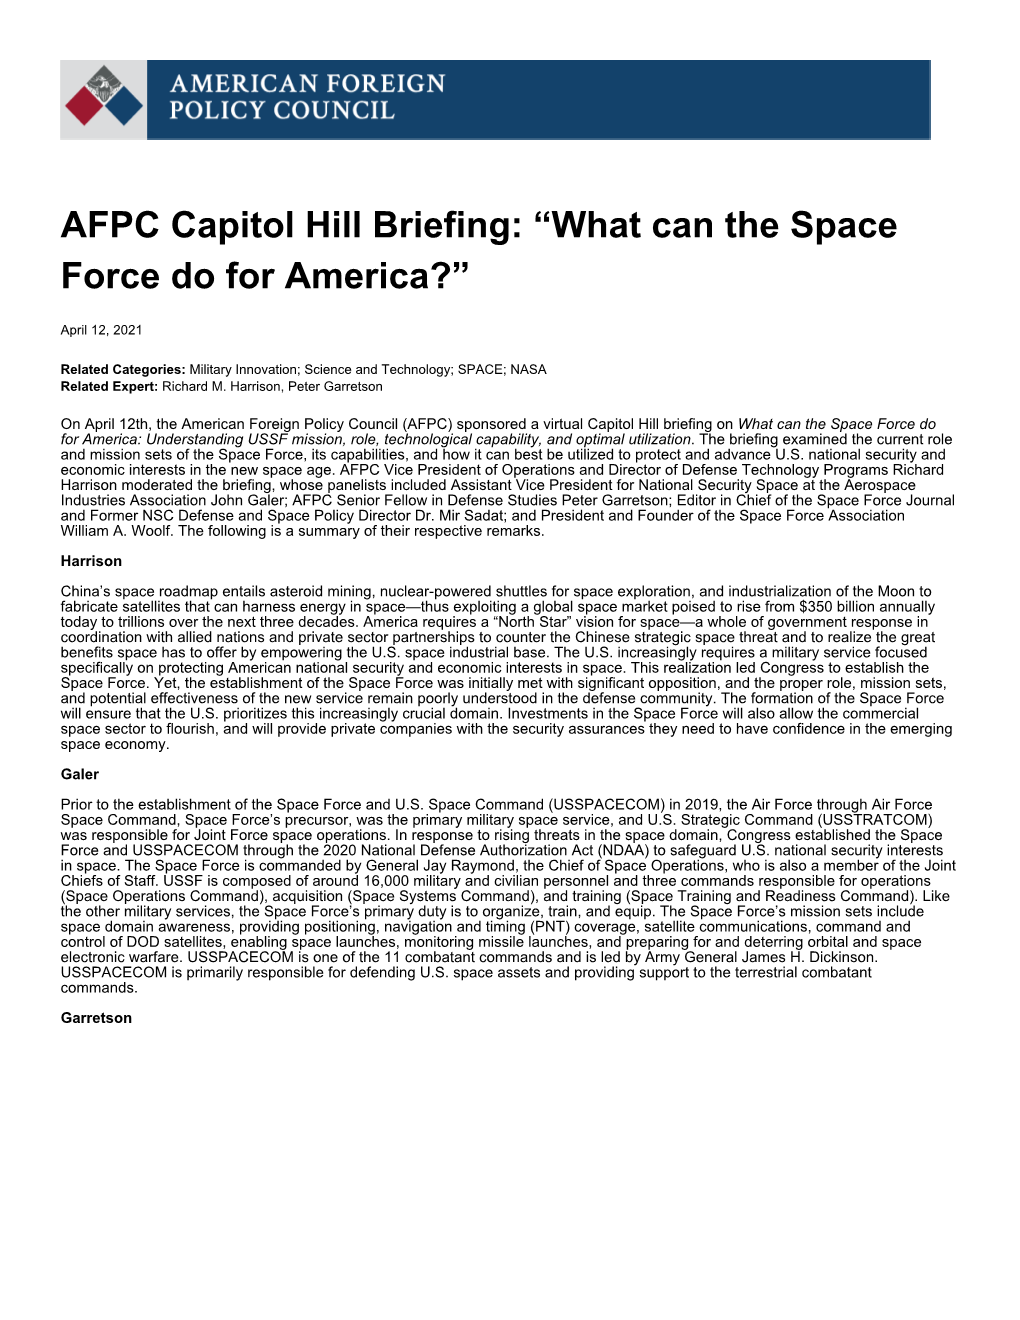 AFPC Capitol Hill Briefing: “What Can the Space Force Do for America?”